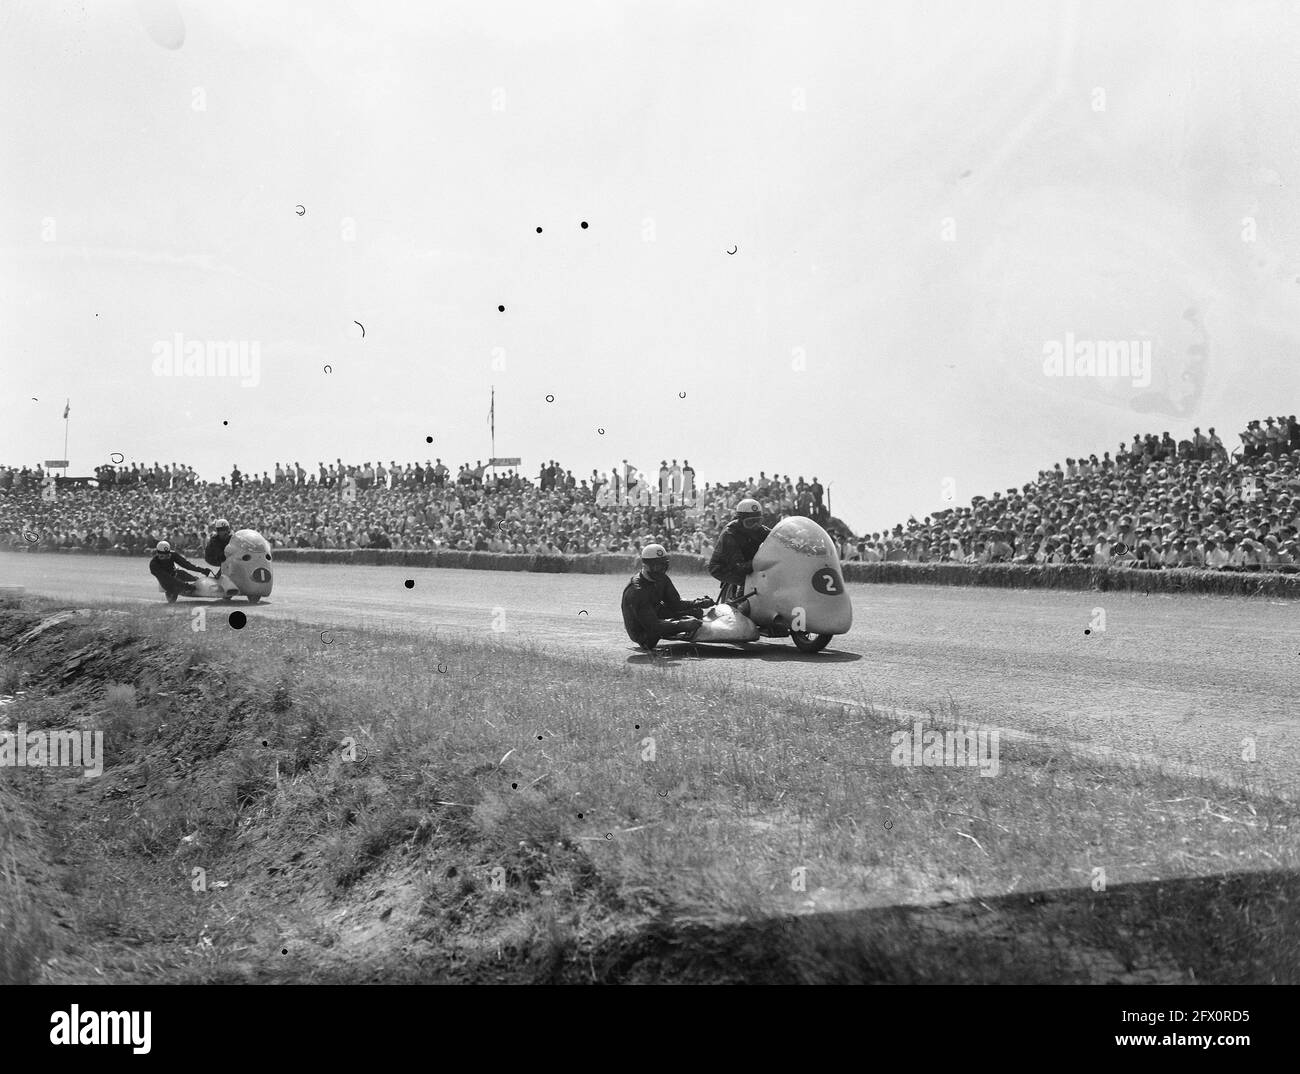 Sidecars. Wilhelm Noll / Fritz Crohn (Germany, 2nd), July 16, 1955, motorsports, The Netherlands, 20th century press agency photo, news to remember, documentary, historic photography 1945-1990, visual stories, human history of the Twentieth Century, capturing moments in time Stock Photo